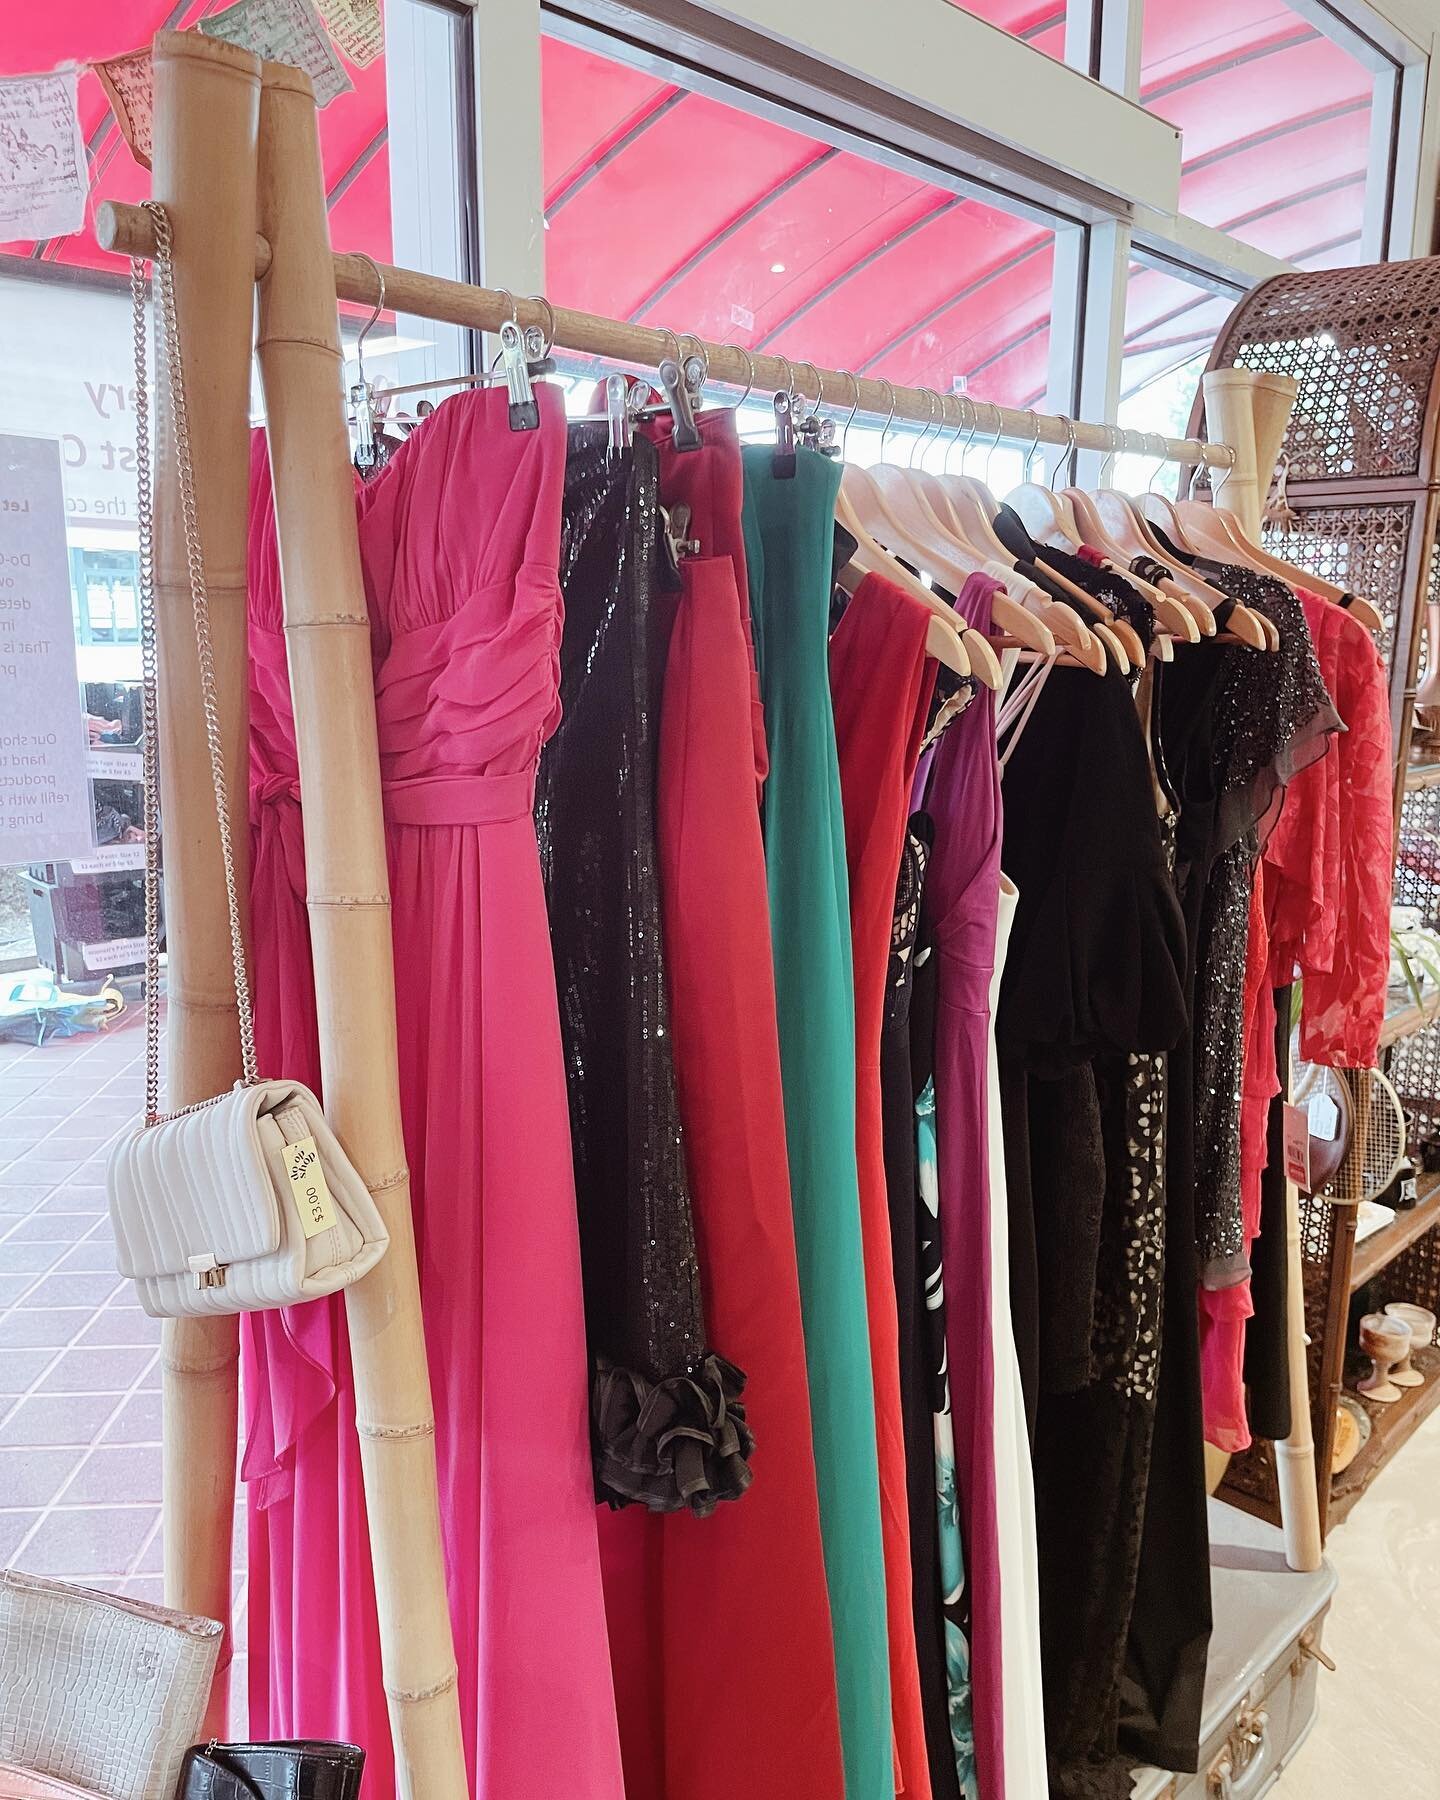 At Do-Op we have a gown for every occasion! 💖

If you have an event coming up we&rsquo;d love to help you find the perfect fit - with tonnes of shoes, bags &amp; jewellery to choose from.

We&rsquo;re back again on Monday but until then enjoy your S